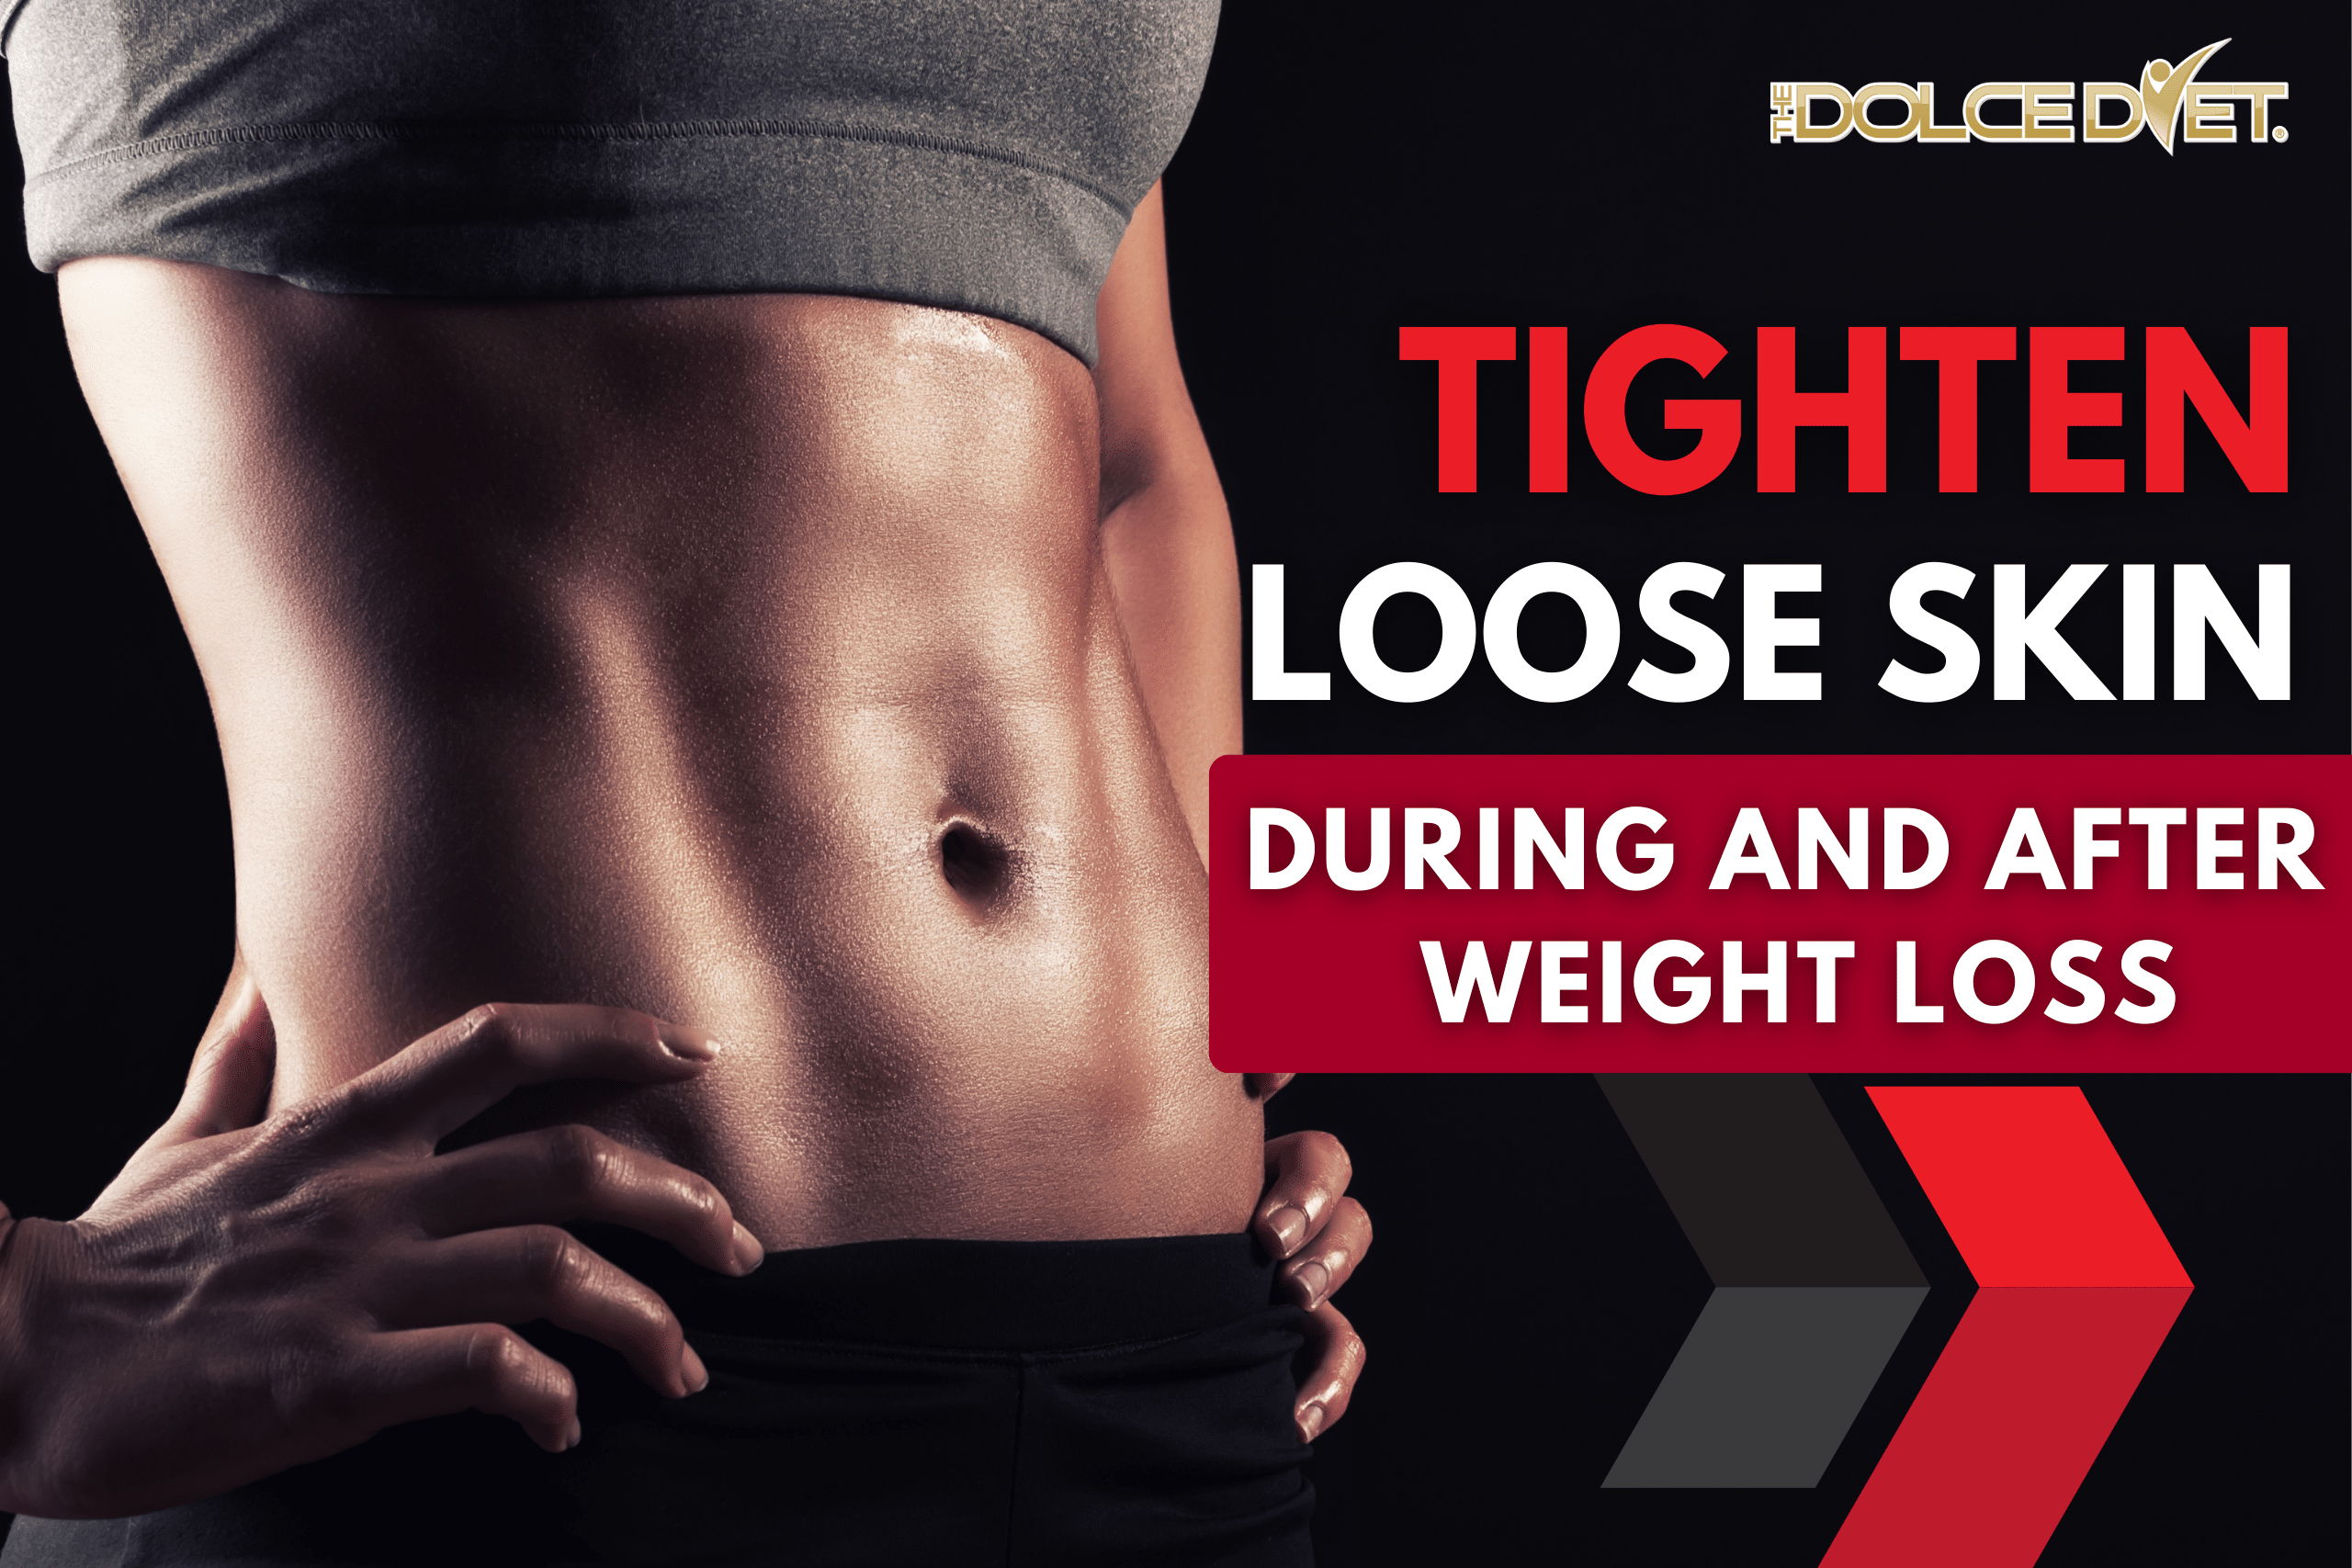 How to Tighten Loose Skin During and After Weight Loss